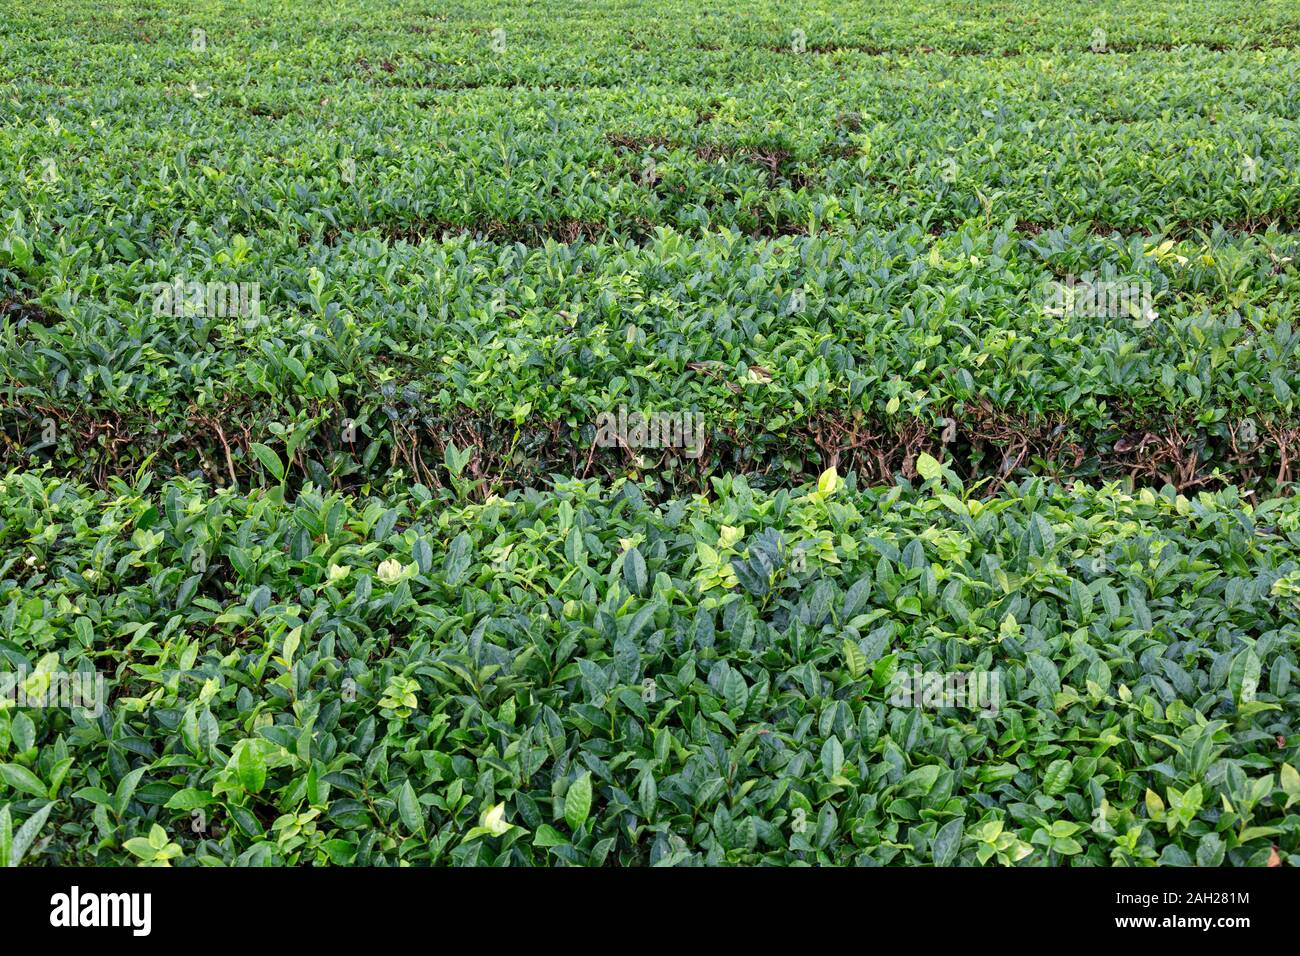 Rows of tea plants at the Gorreana Tea Plantation and Factory on the island of Sao Miguel in the Azores. Stock Photo